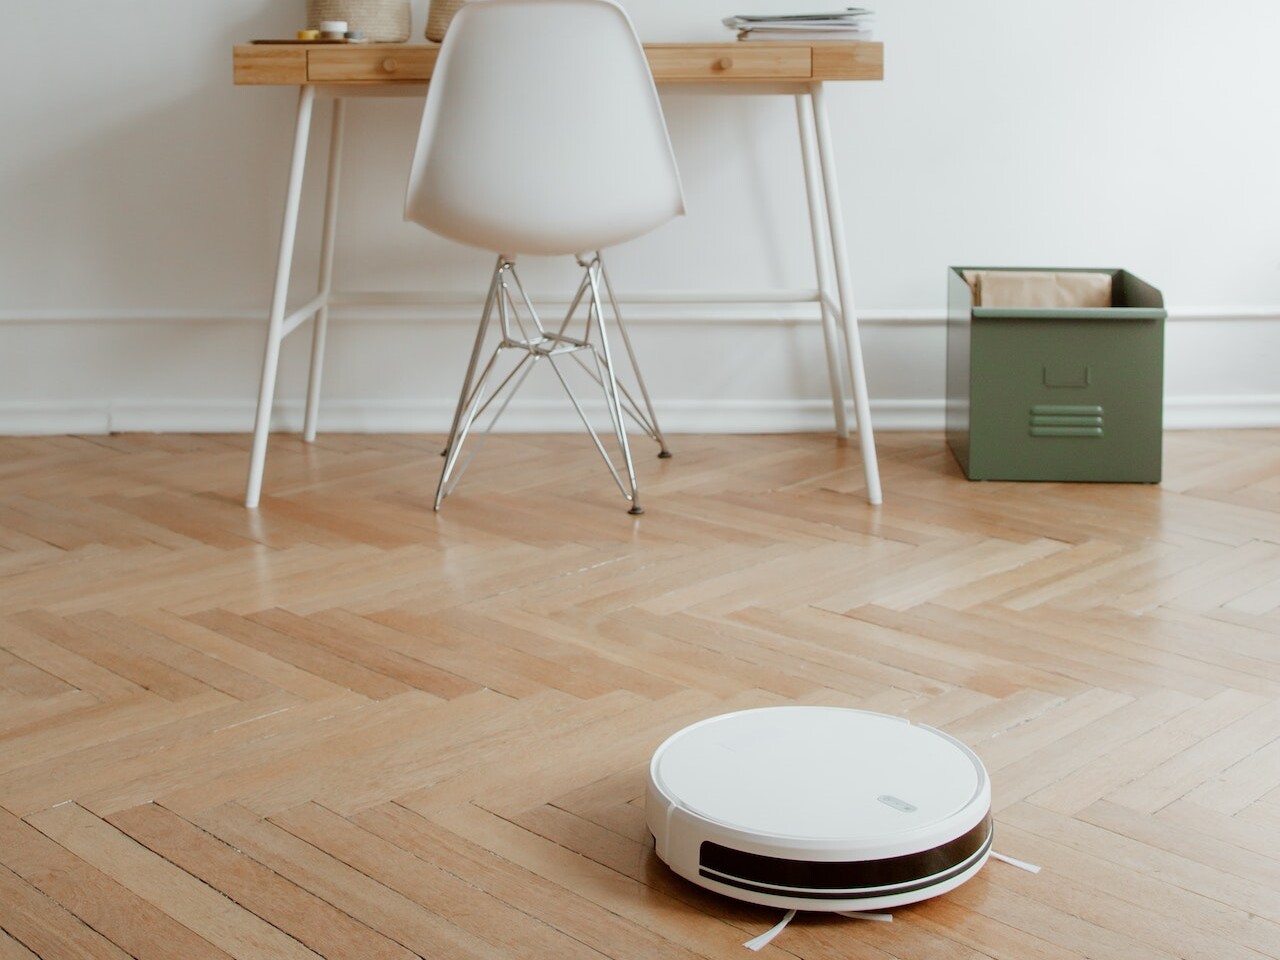 Robot vacuum - The best smart home devices for 2023